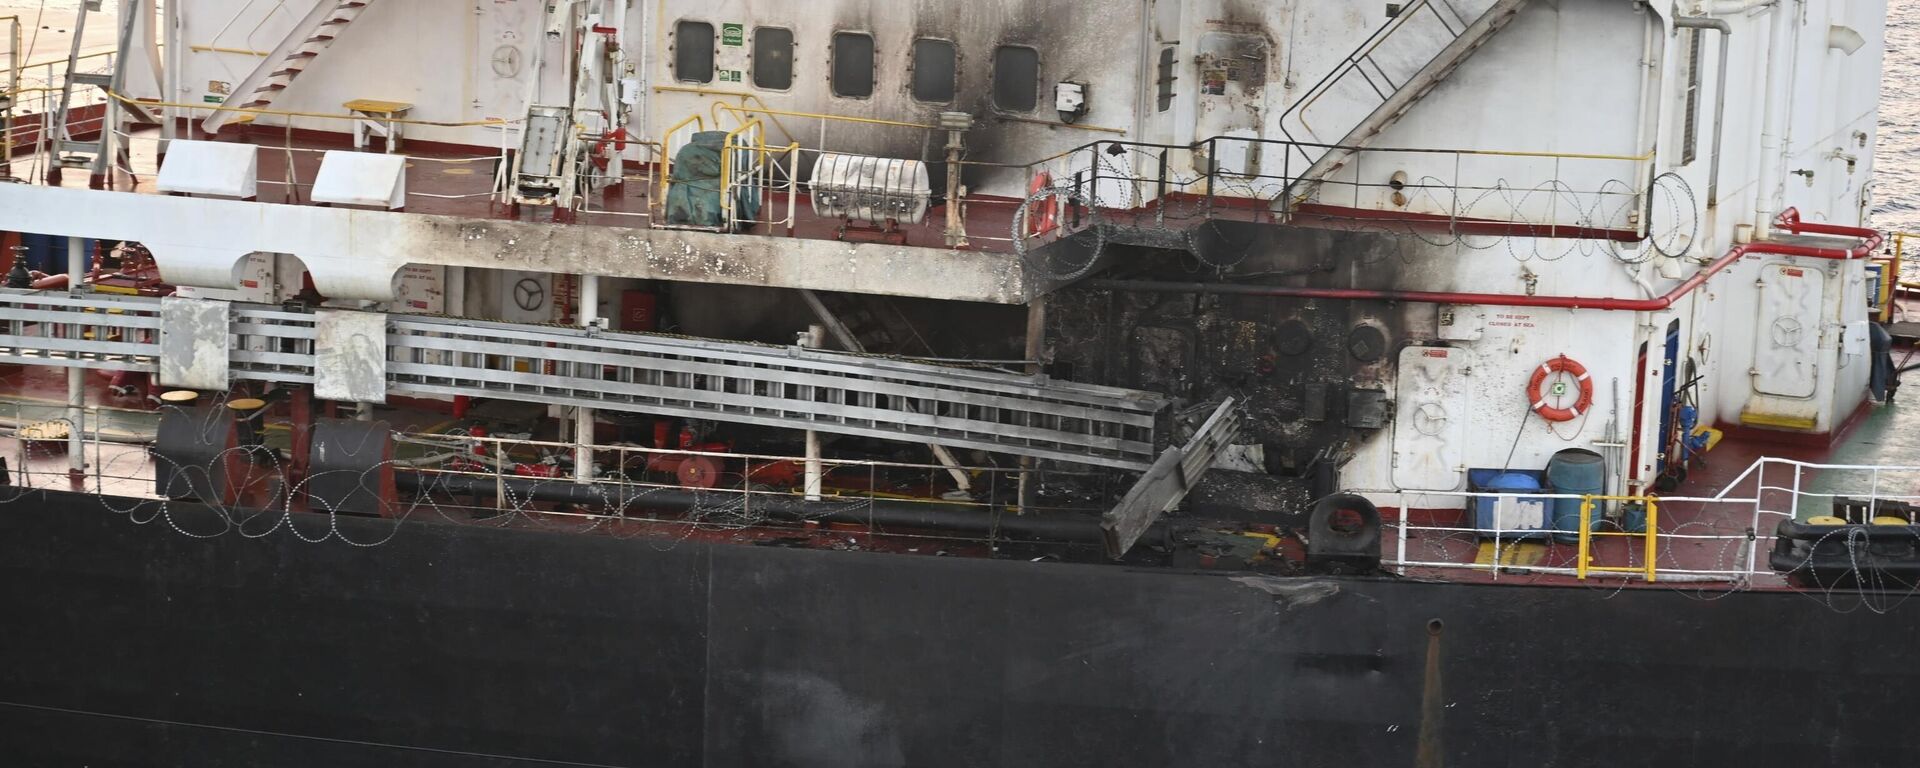 This photograph provided by the Indian Navy shows US-owned ship Genco Picardy that came under attack Wednesday from a bomb-carrying drone launched by Yemen's Houthi rebels in the Gulf of Aden, Thursday, Jan.18, 2024 - Sputnik International, 1920, 28.05.2024